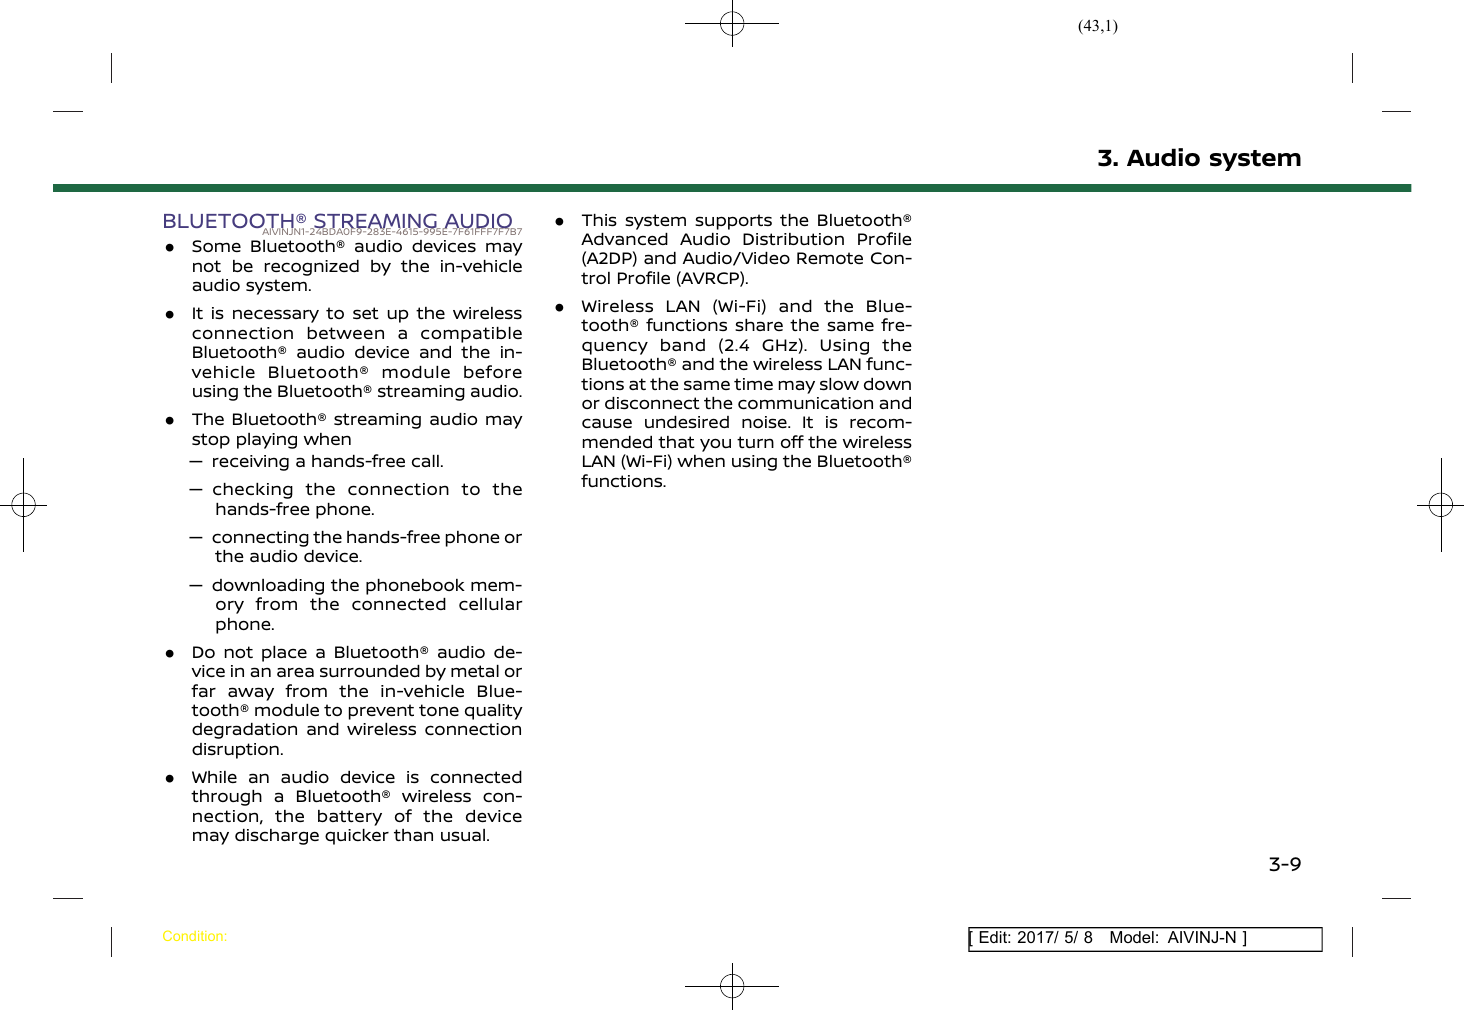 Page 43 of Robert Bosch Car Multimedia AIVICMFB0 Navigation System with Bluetooth and WLAN User Manual